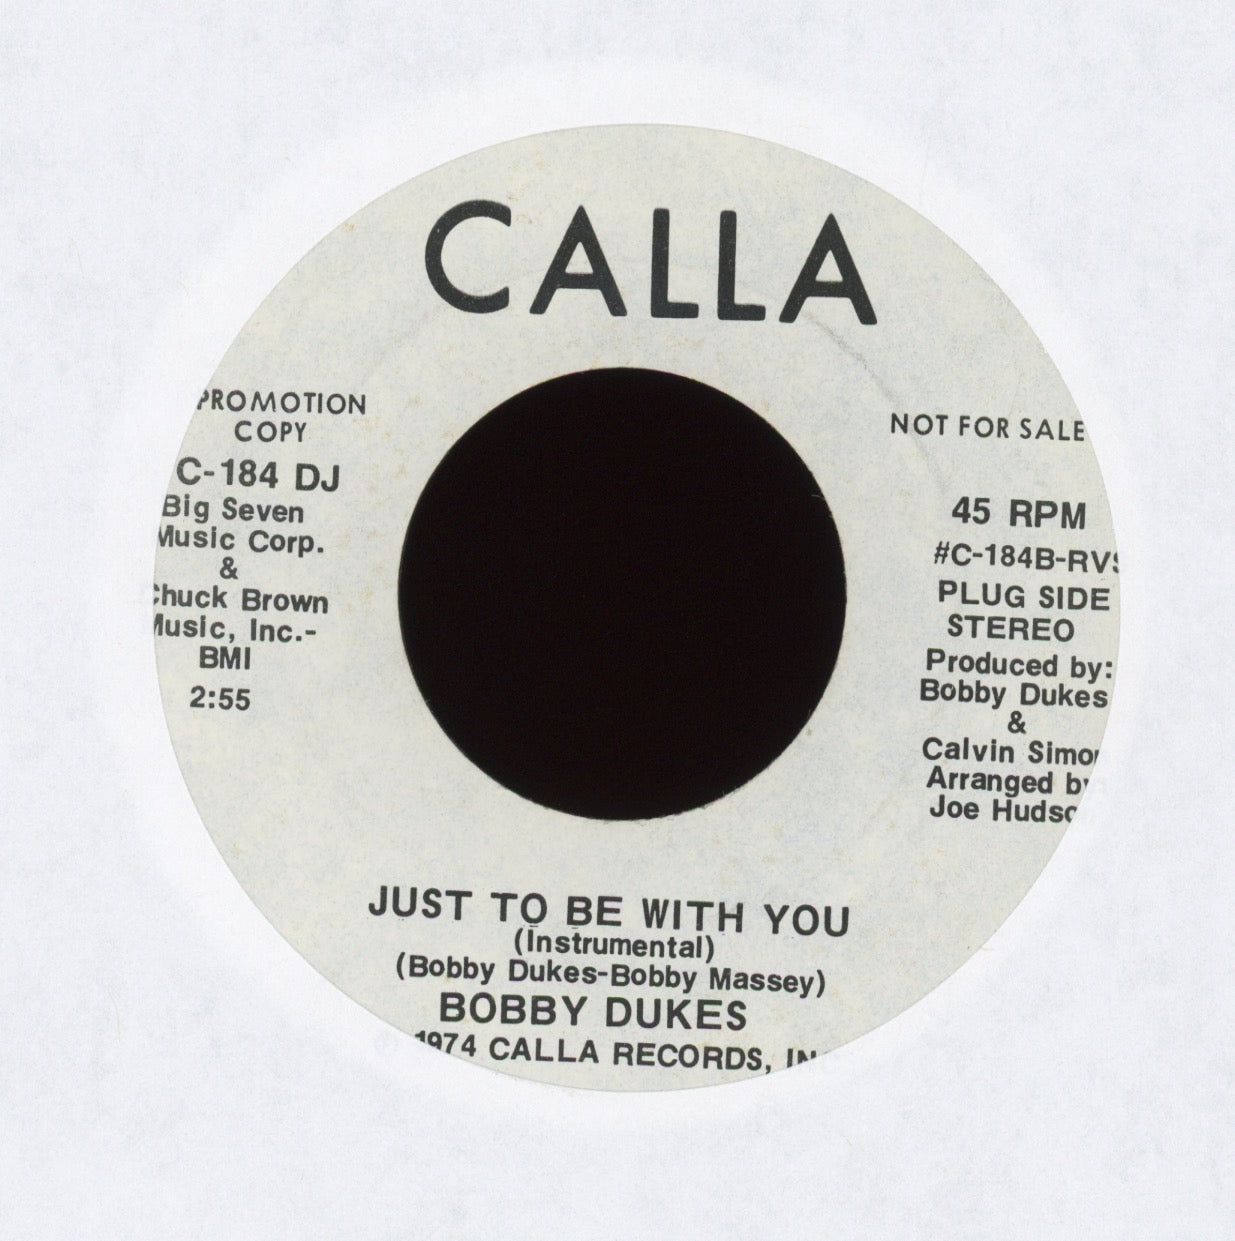 Robert Dukes - Just To Be With You (Instrumental) on Calla Promo Northern Soul 45